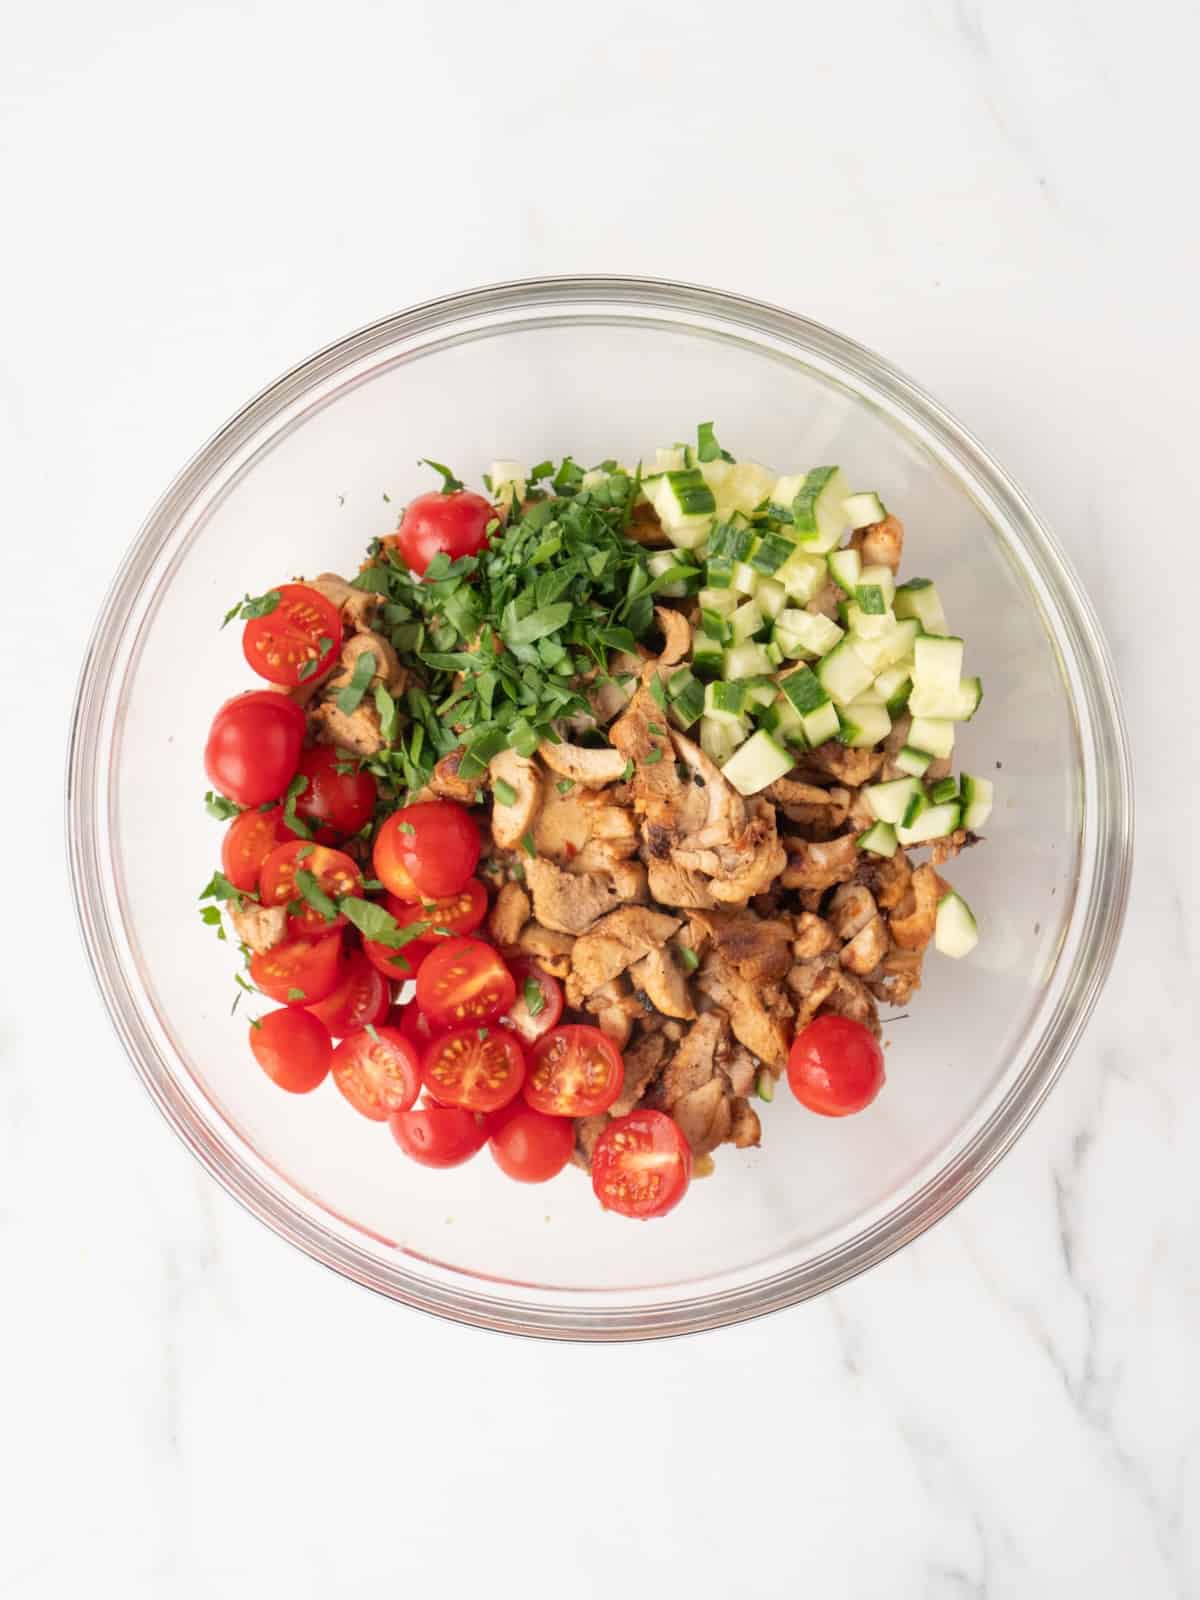 A large glass mixing bowl with grilled sliced chicken, halved cherry tomatoes, chopped cucumbers and parsley.